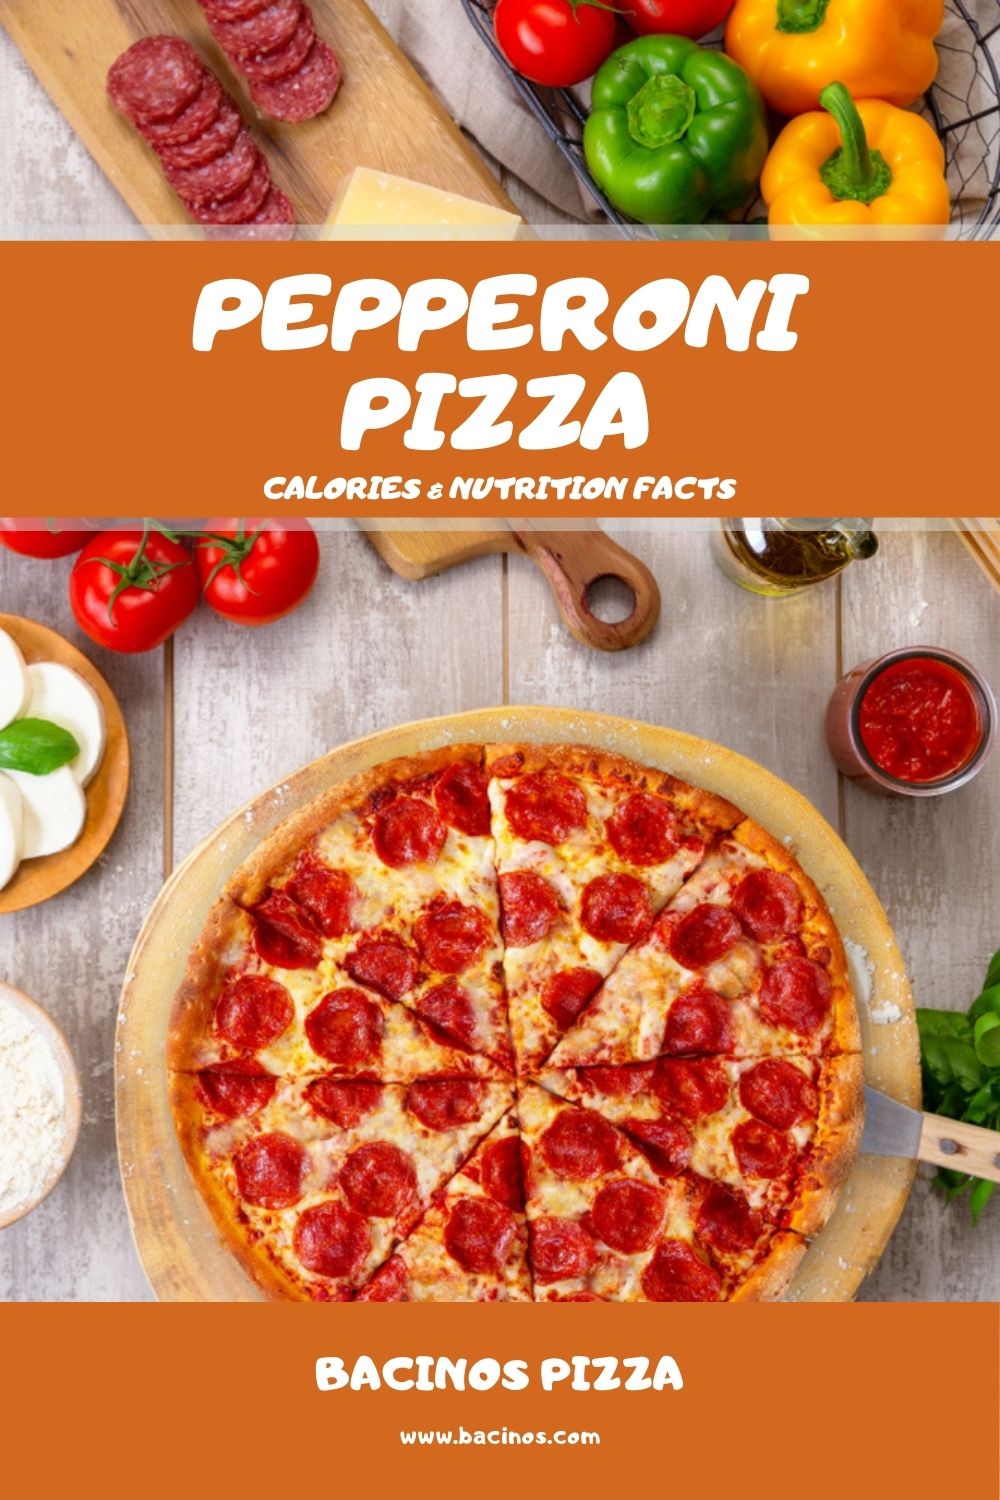 Pepperoni Pizza Calories & Nutrition Facts (Chart) 2